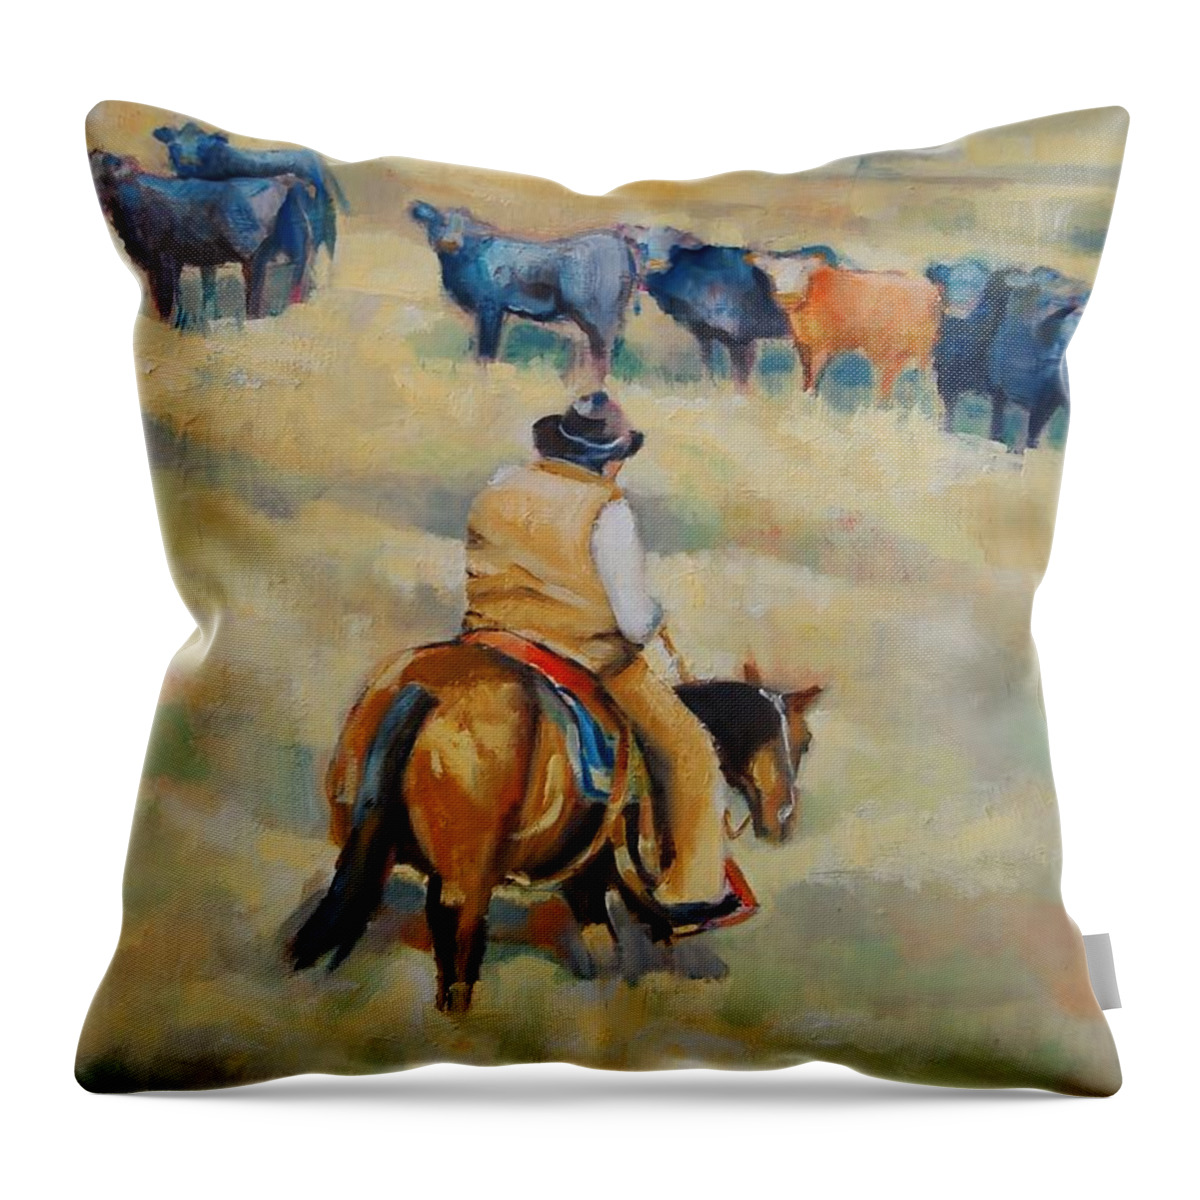 Cattle Throw Pillow featuring the painting Crossing by Jean Cormier